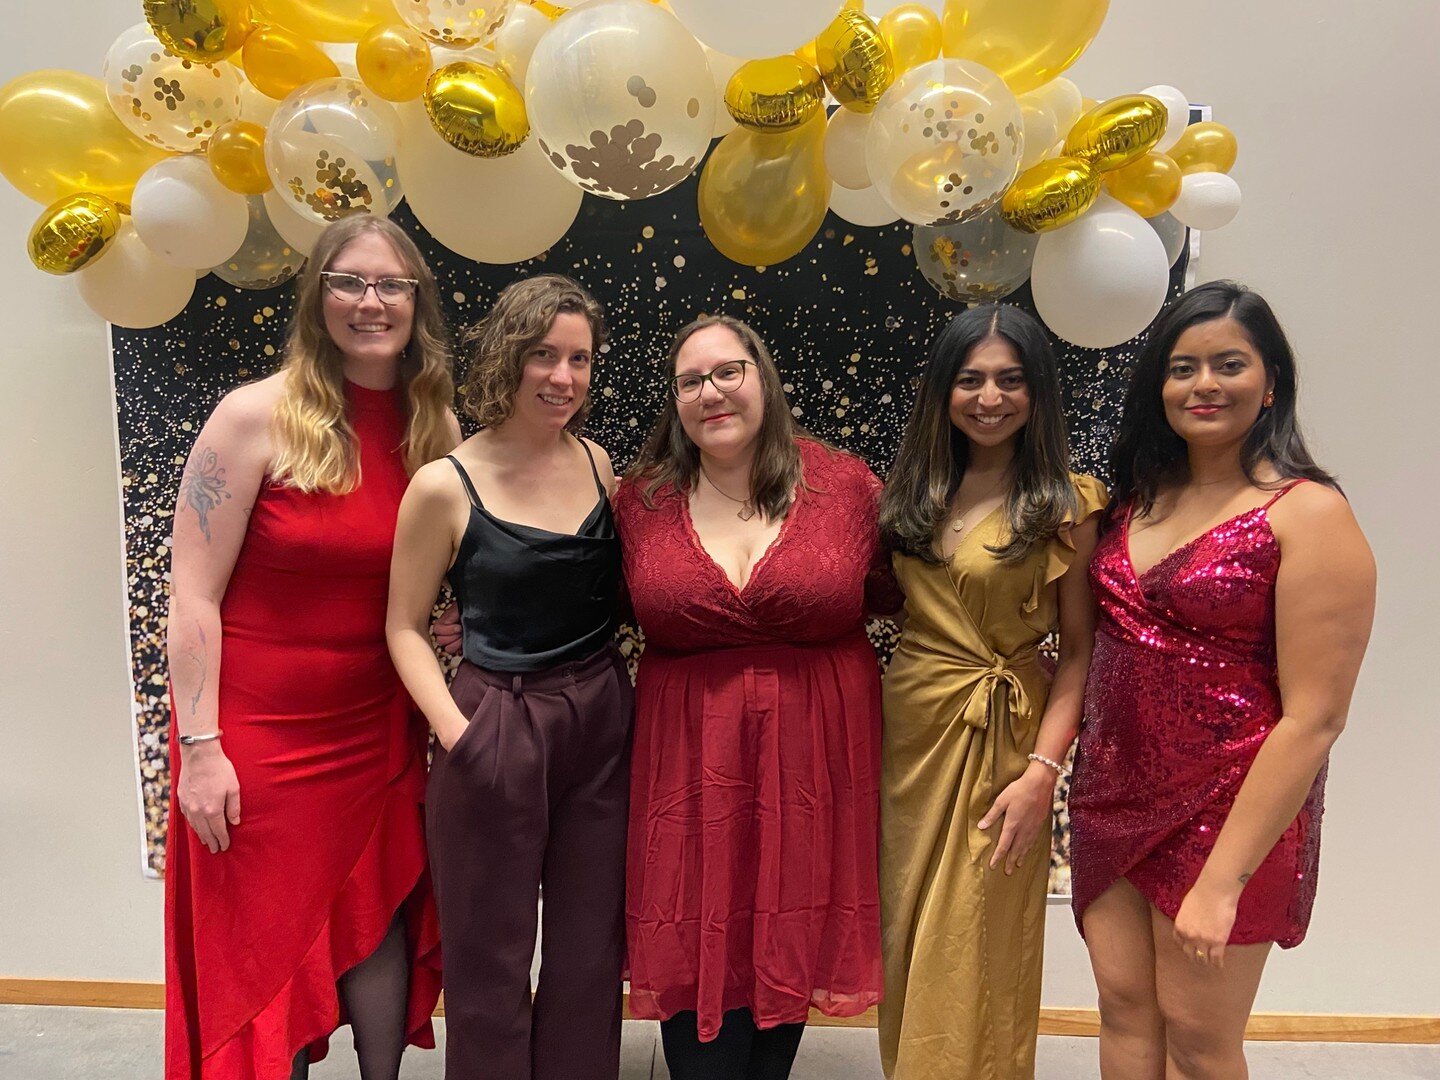 We had a blast at the @uwba.osu Charity Gala! Thank you so much to UWBA for such an amazing event and incredibly generous donation - we are so grateful for your continued partnership! 💕